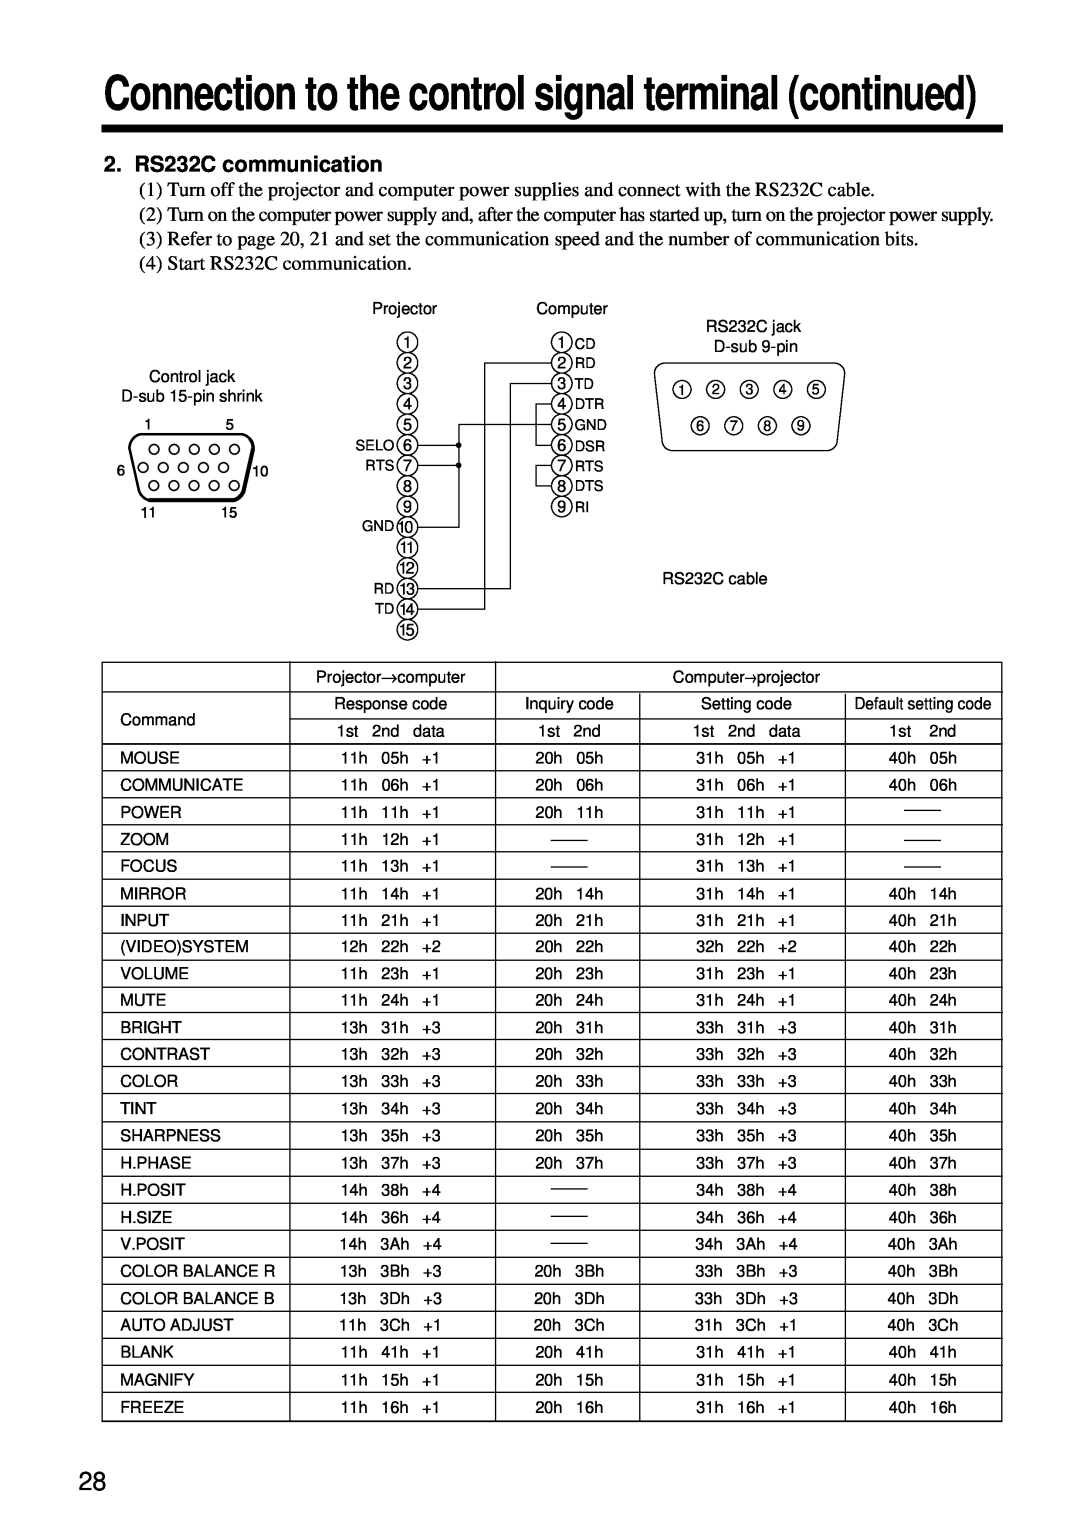 Hitachi CP-X960W user manual 2. RS232C communication, Connection to the control signal terminal continued 